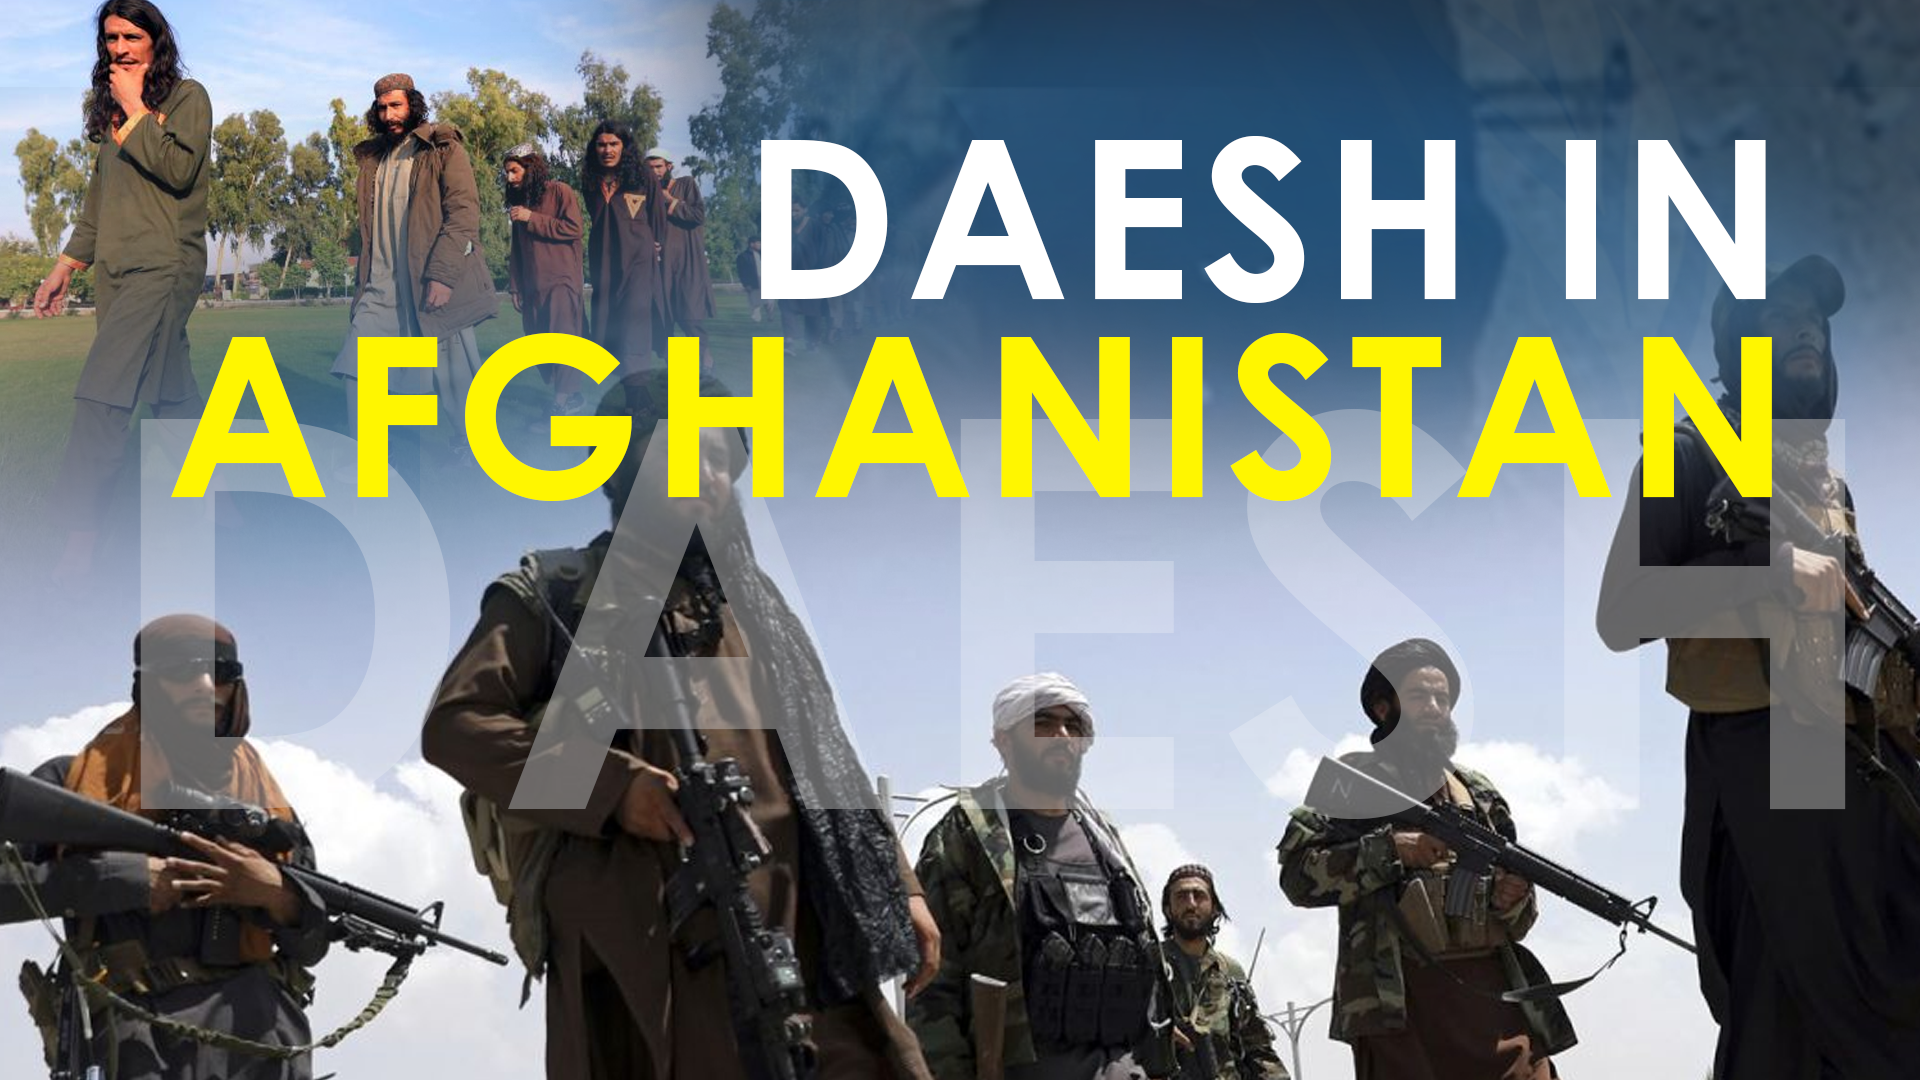 US support for Daesh in Afghanistan